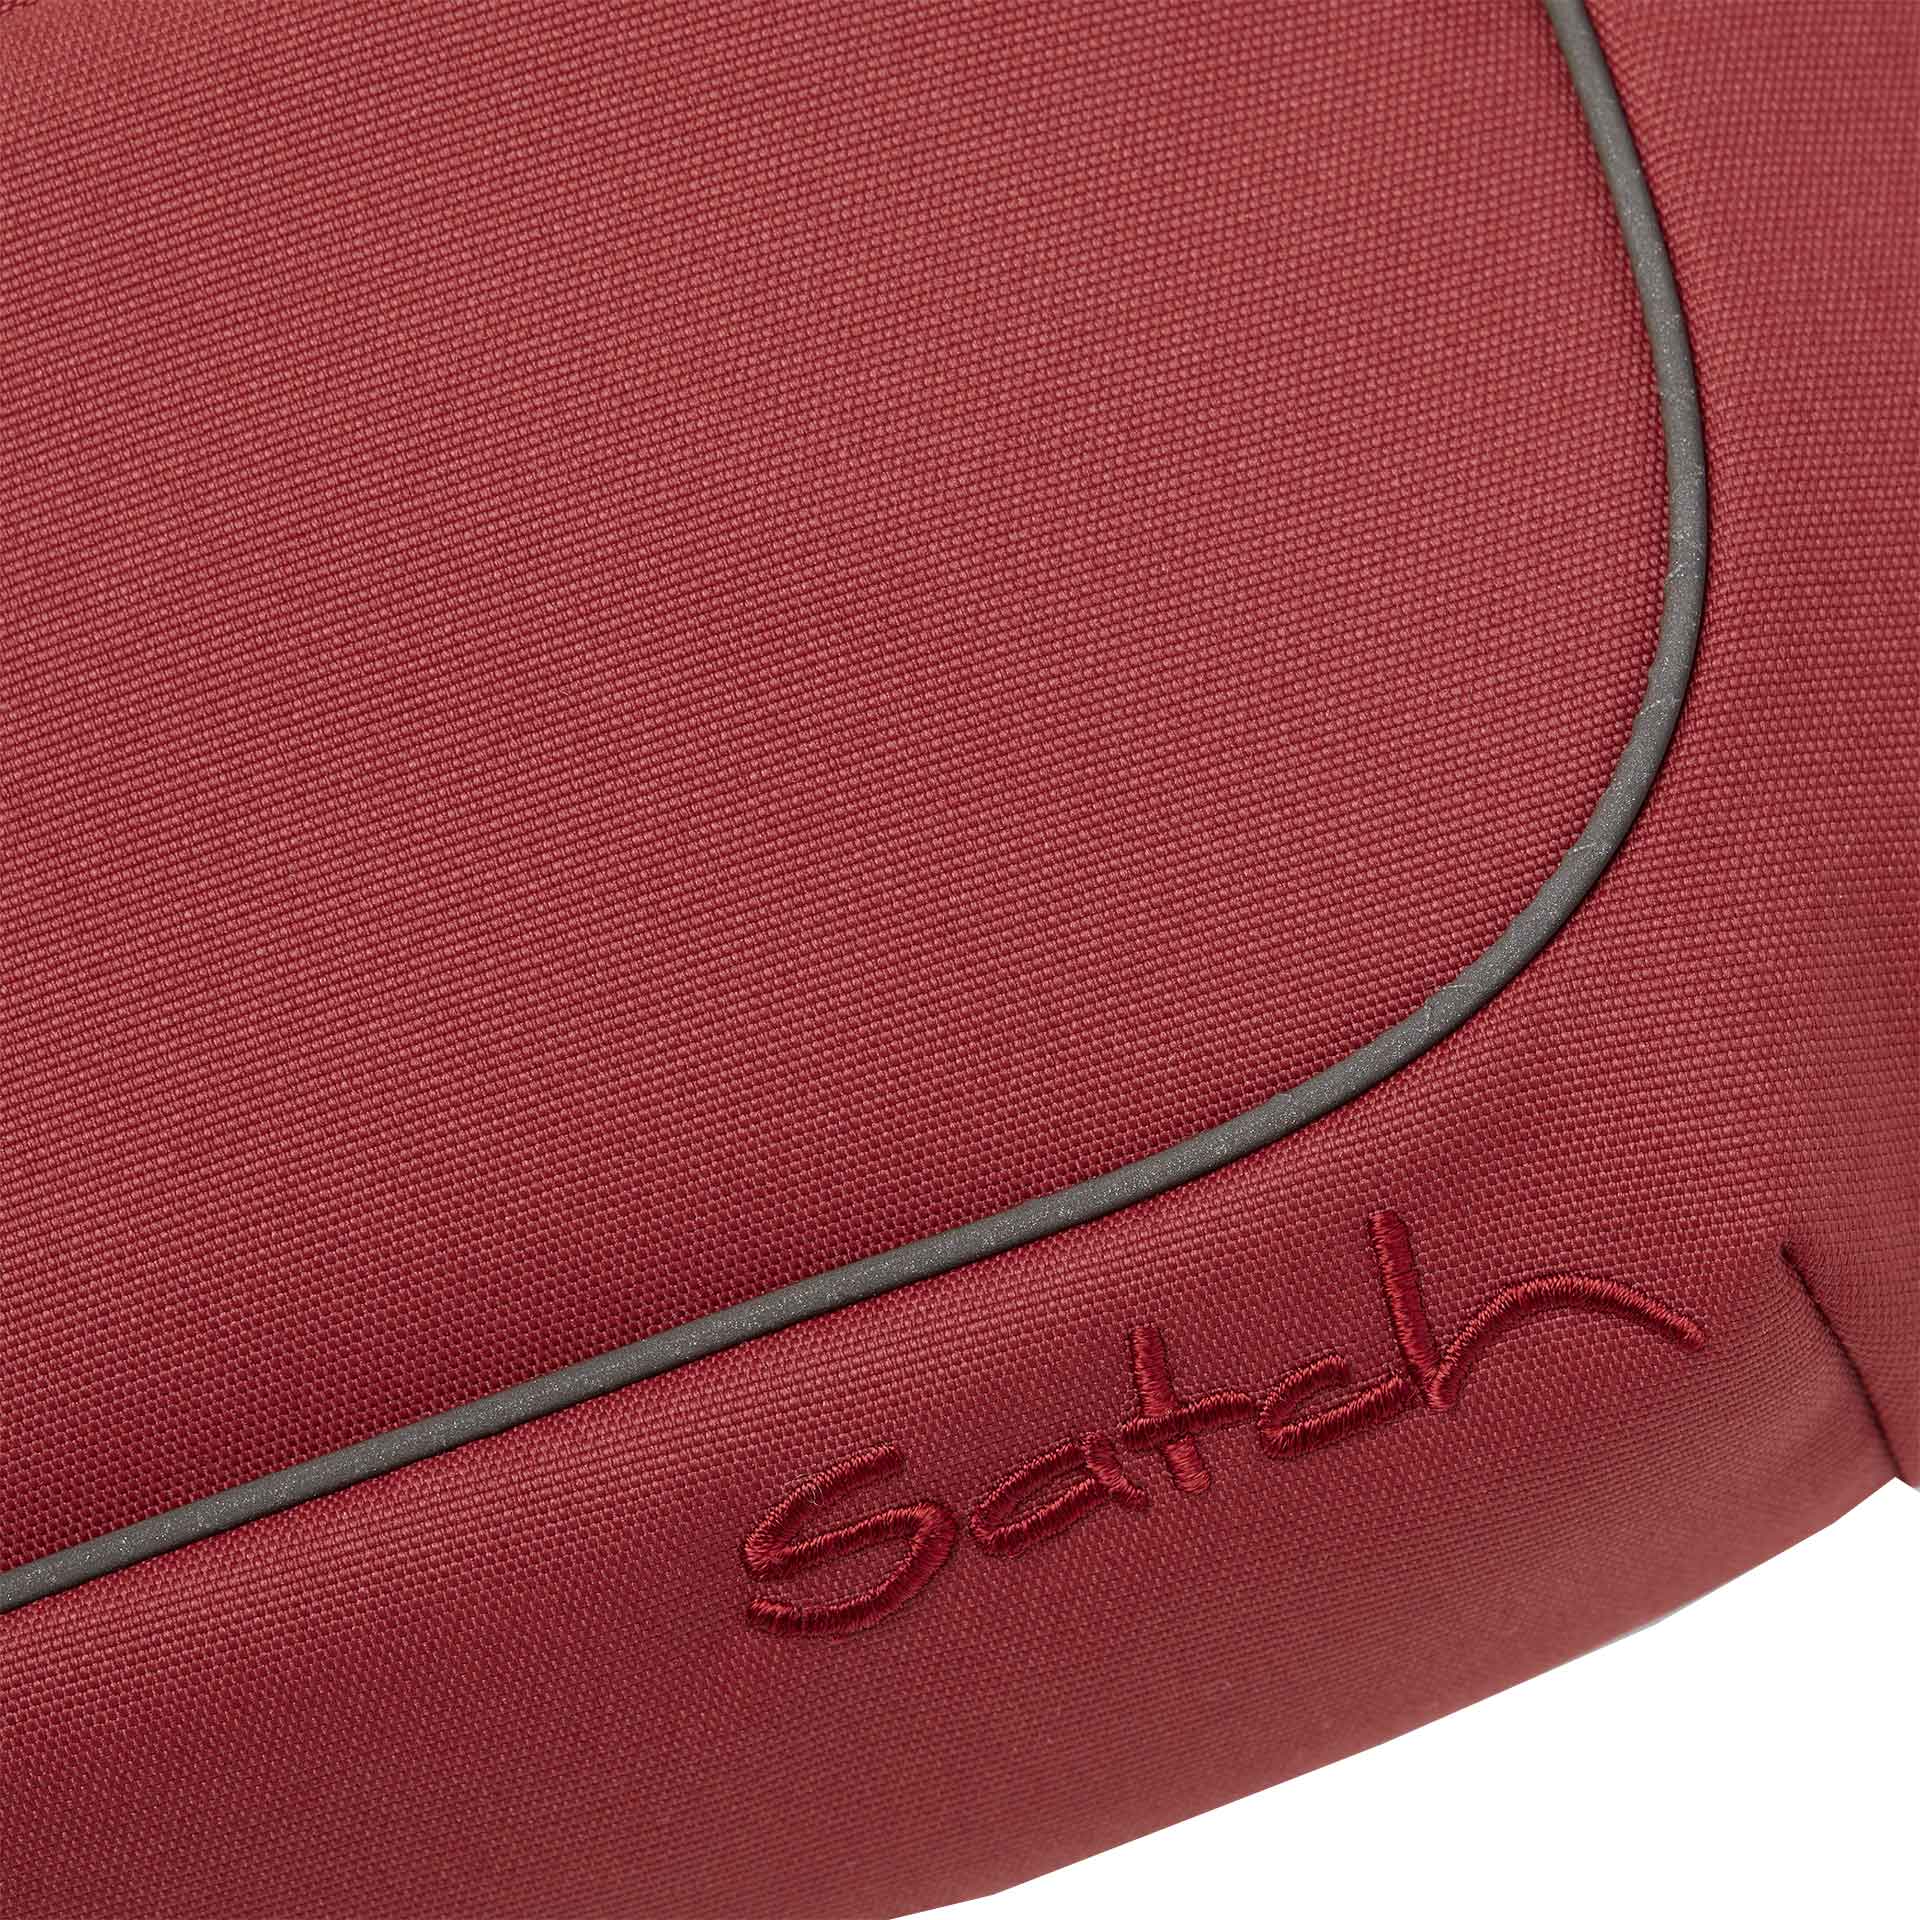 Satch Cross Easy Bauchtasche pure red